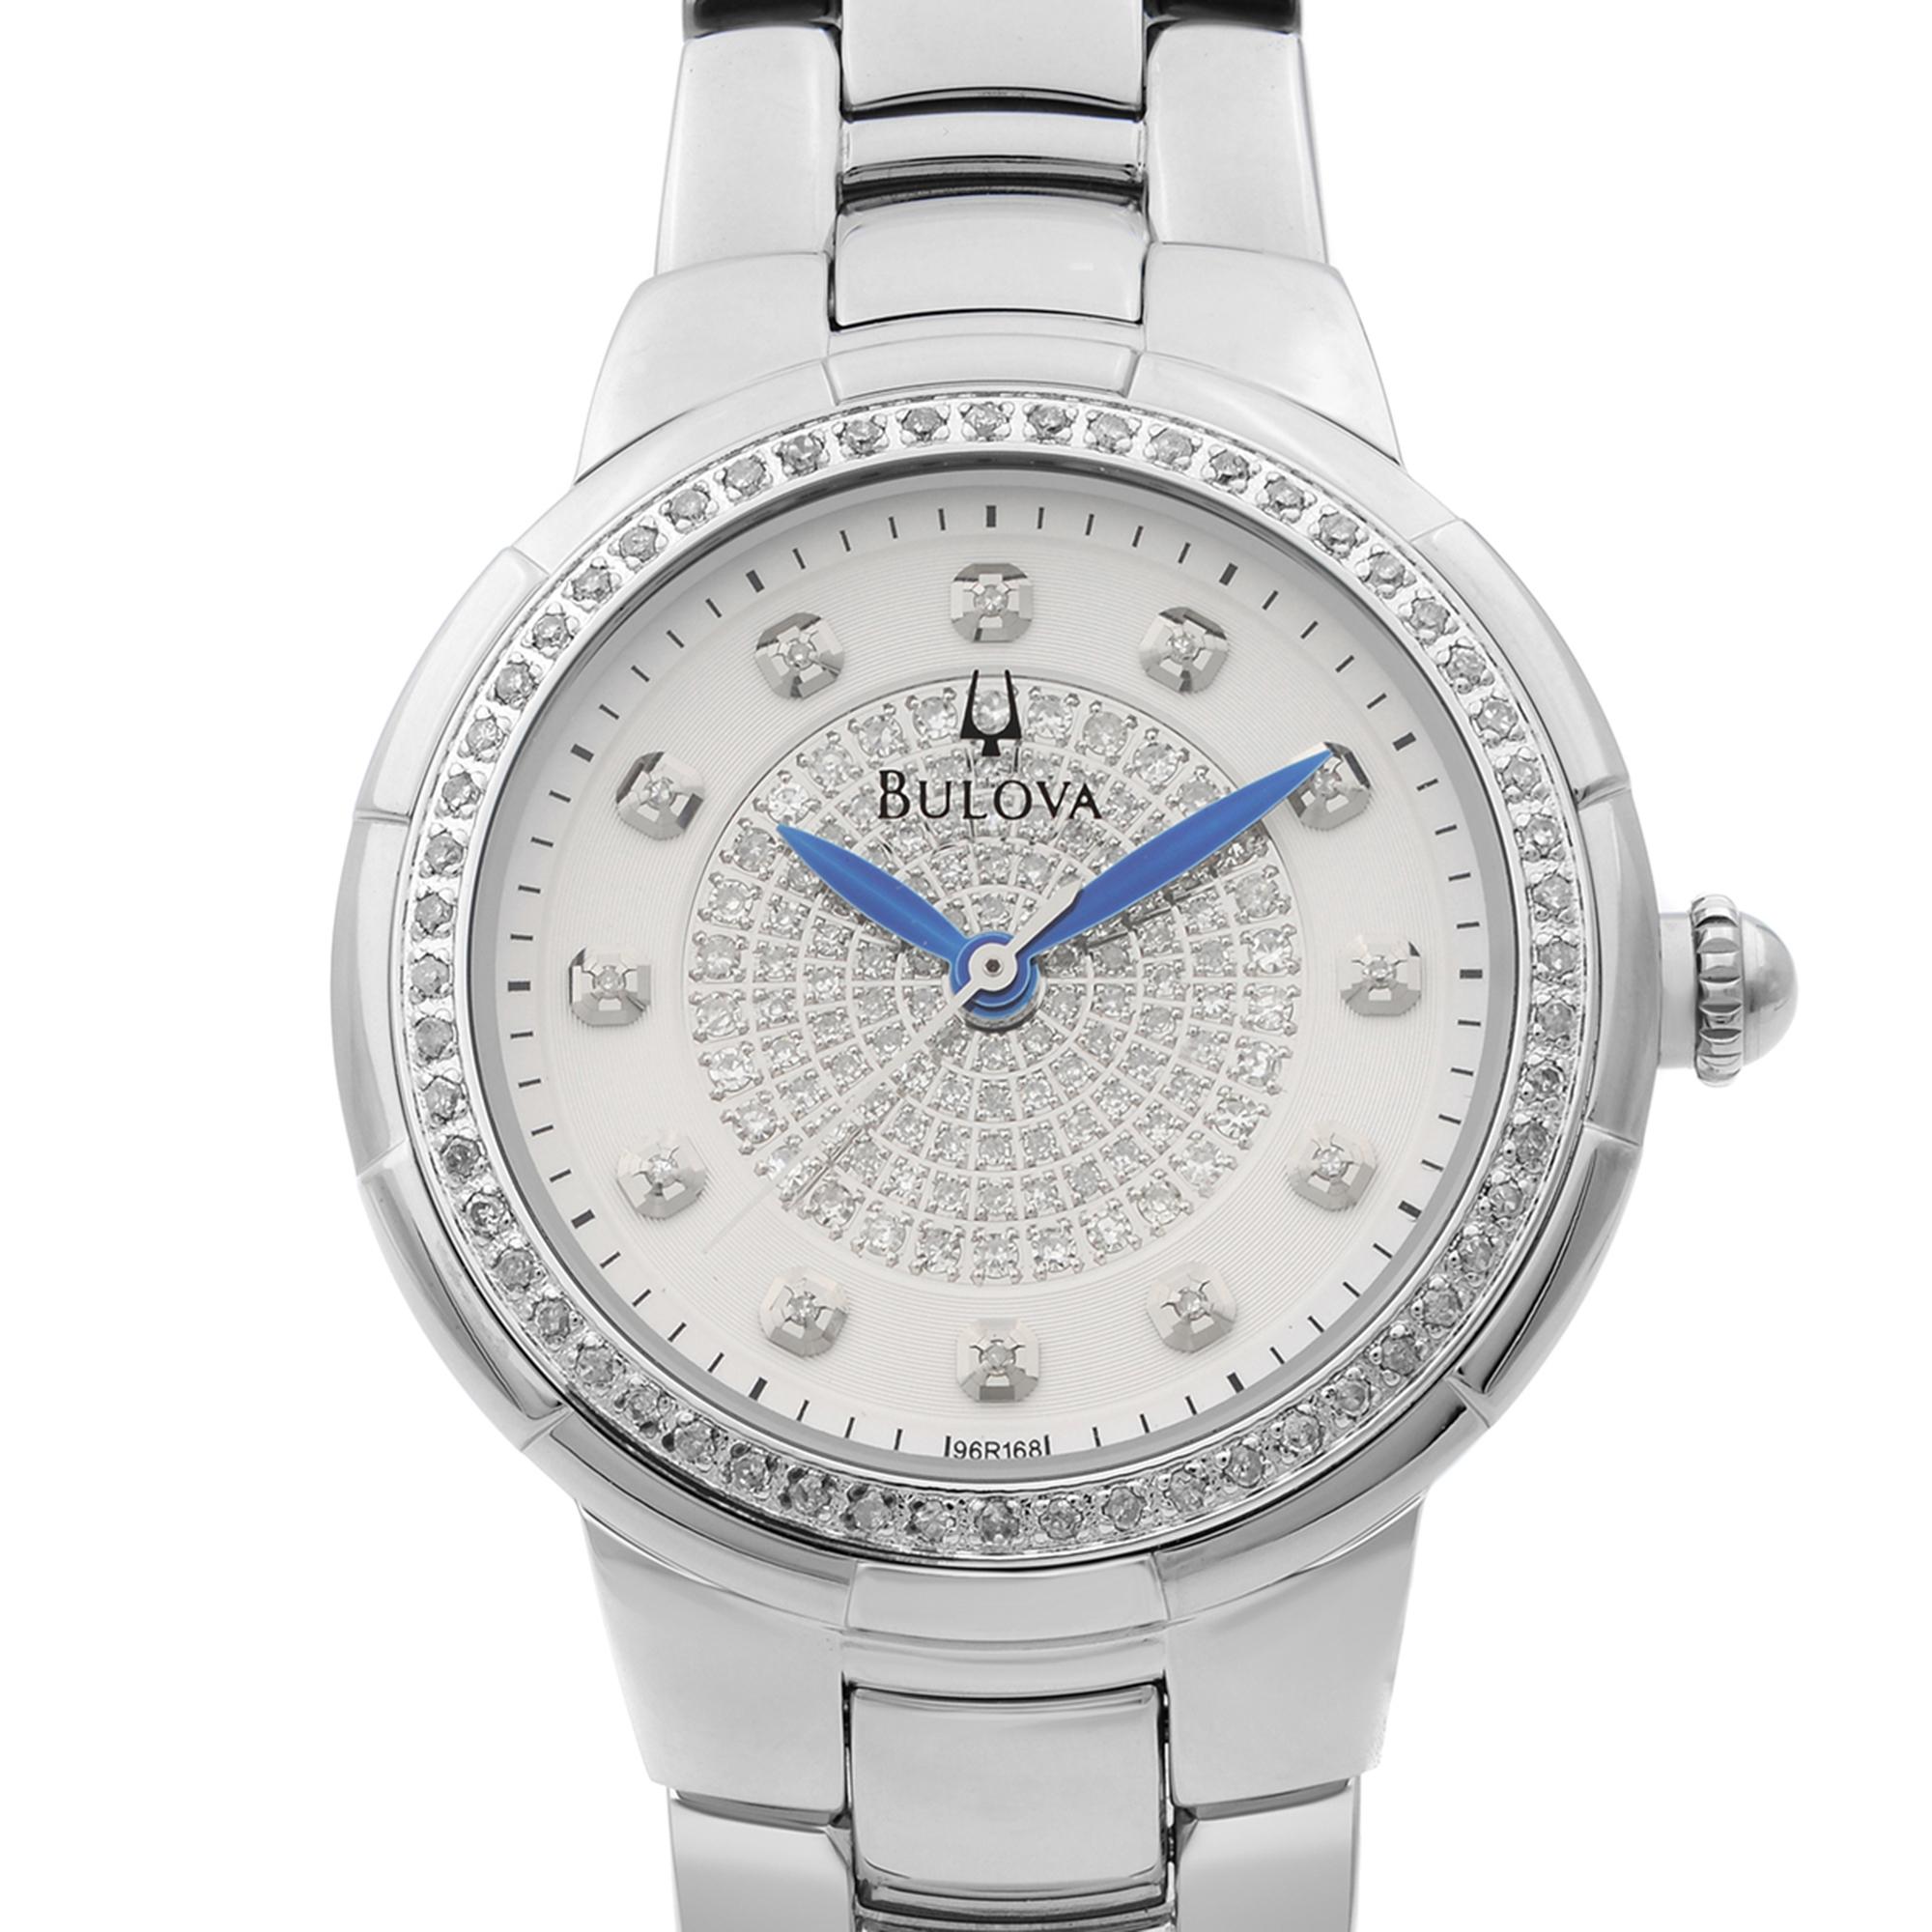 Display Model Bulova 33mm Stainless Steel White Diamond Dial Ladies Quartz Watch 96R168. This Timepiece is Powered by a Quartz Movement and Features: Stainless Steel Case and Bracelet. Fixed Stainless Steel Bezel set with Diamonds. White dial with